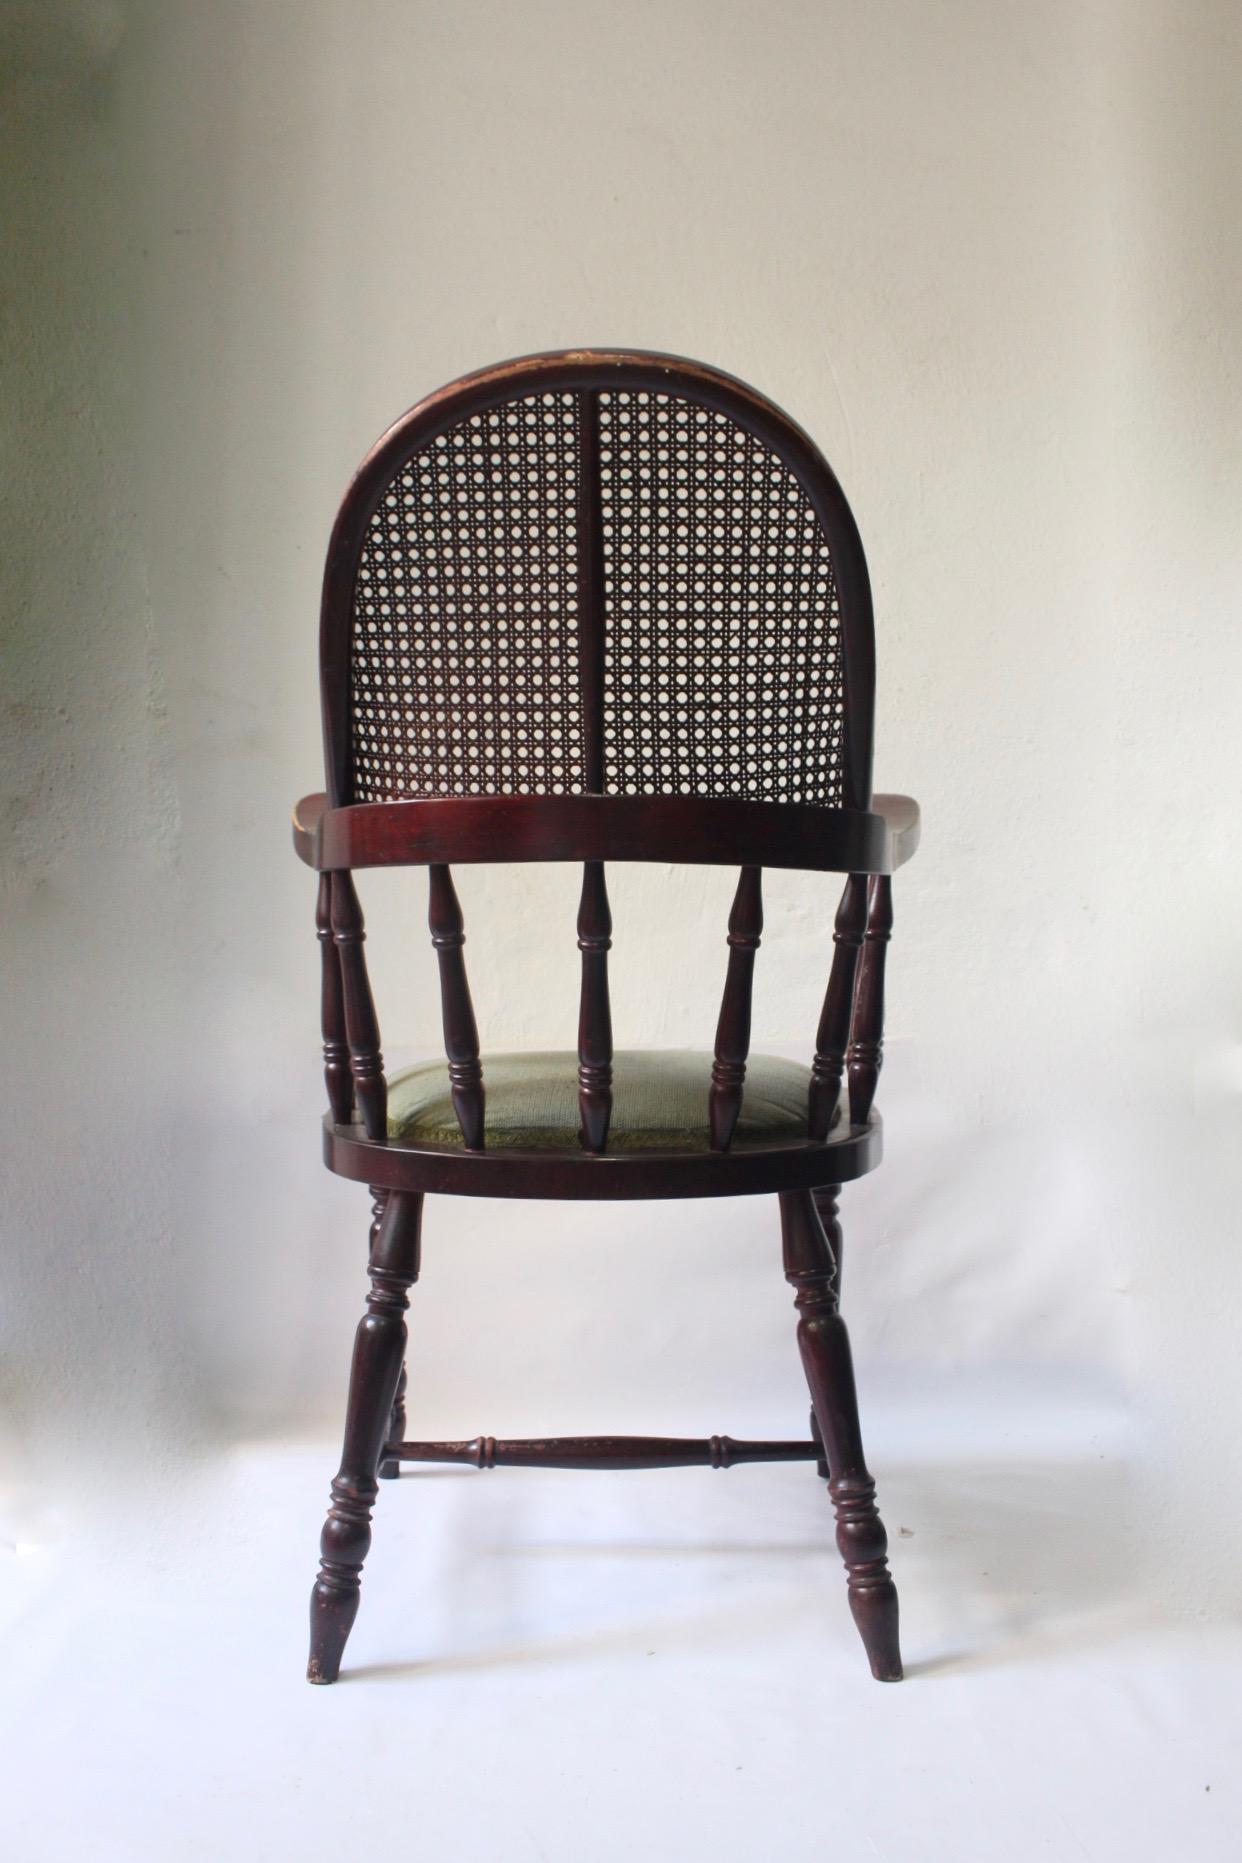 Hand-Woven Antique Uncommon English Windsor Stick Back Caned Chair, Late 19th Century For Sale